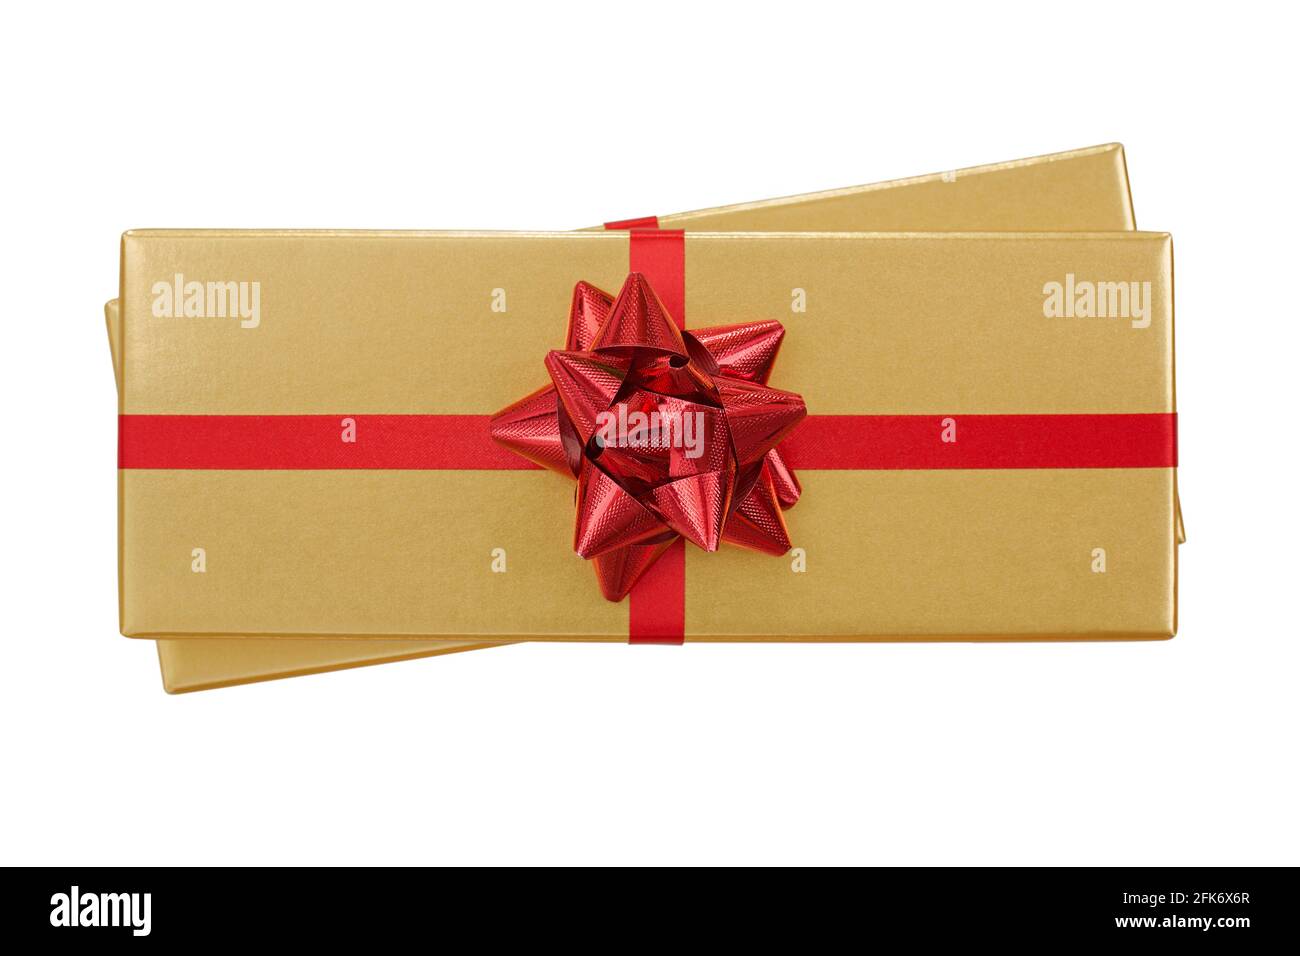 Shiny scarlet ribbon for gift wrapping Stock Photo by ©agencyby 19381745